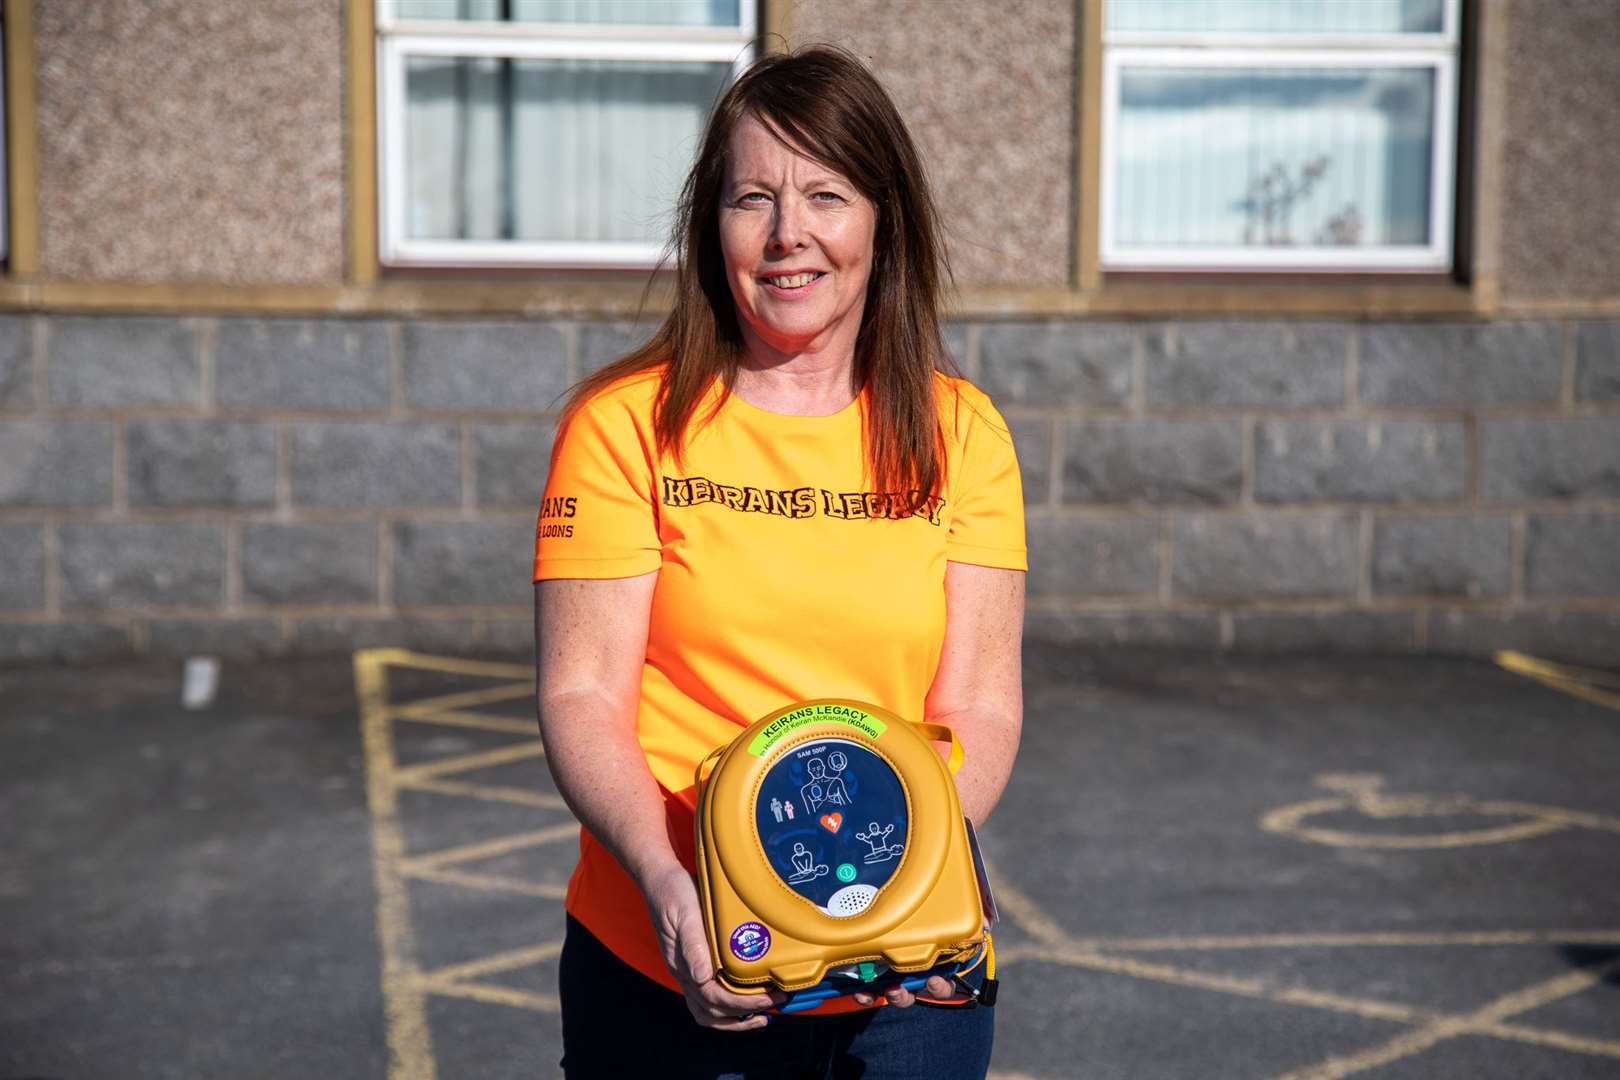 Sandra McKandie with the new defibrillator which has been installed at Crudie Primary School thanks to help from Keiran's Legacy